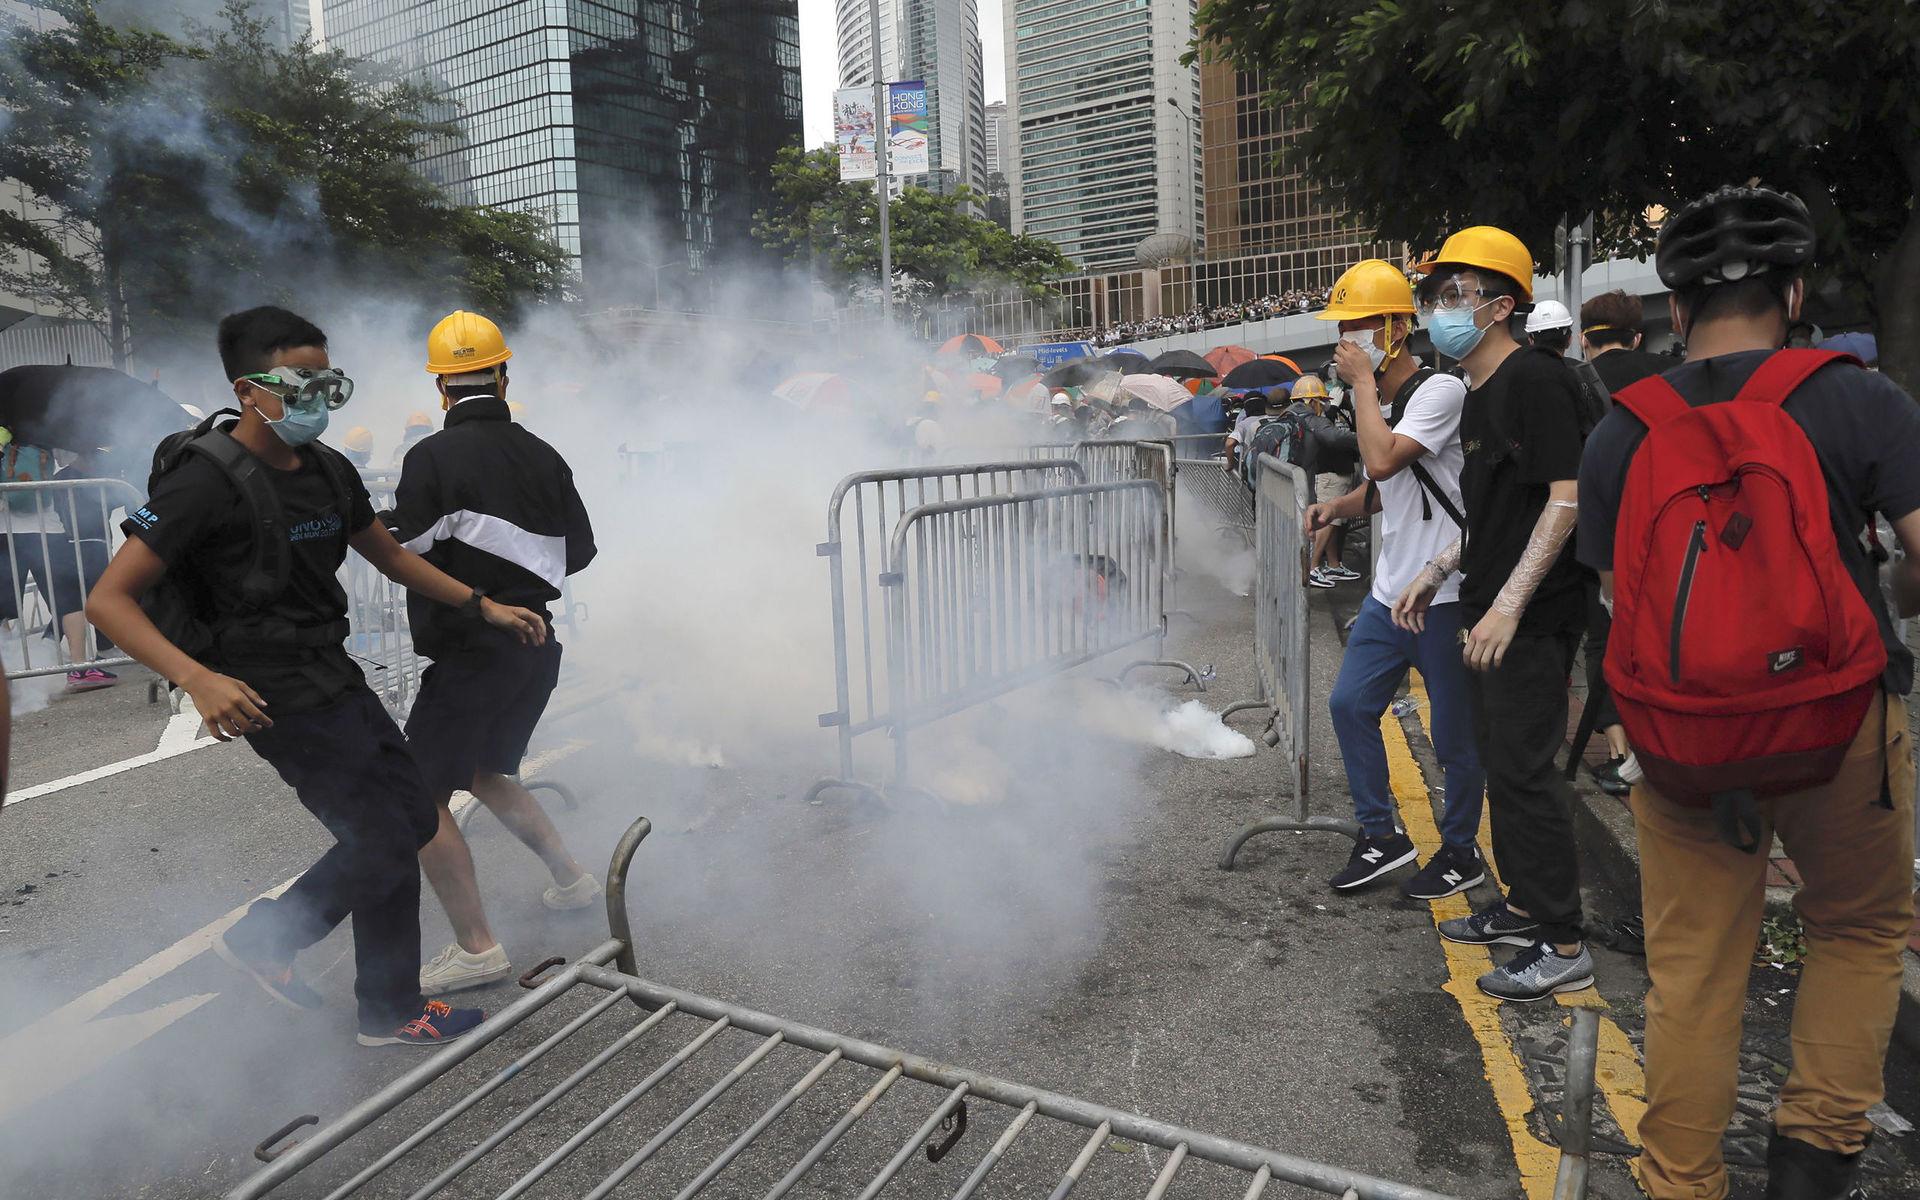 Protesters react to tear gas during a large protest near the Legislative Council in Hong Kong, Wednesday, June 12, 2019. Hong Kong police have used tear gas and high-pressure hoses against thousands of protesters opposing a highly controversial extradition bill outside government headquarters.  (AP Photo/Kin Cheung)